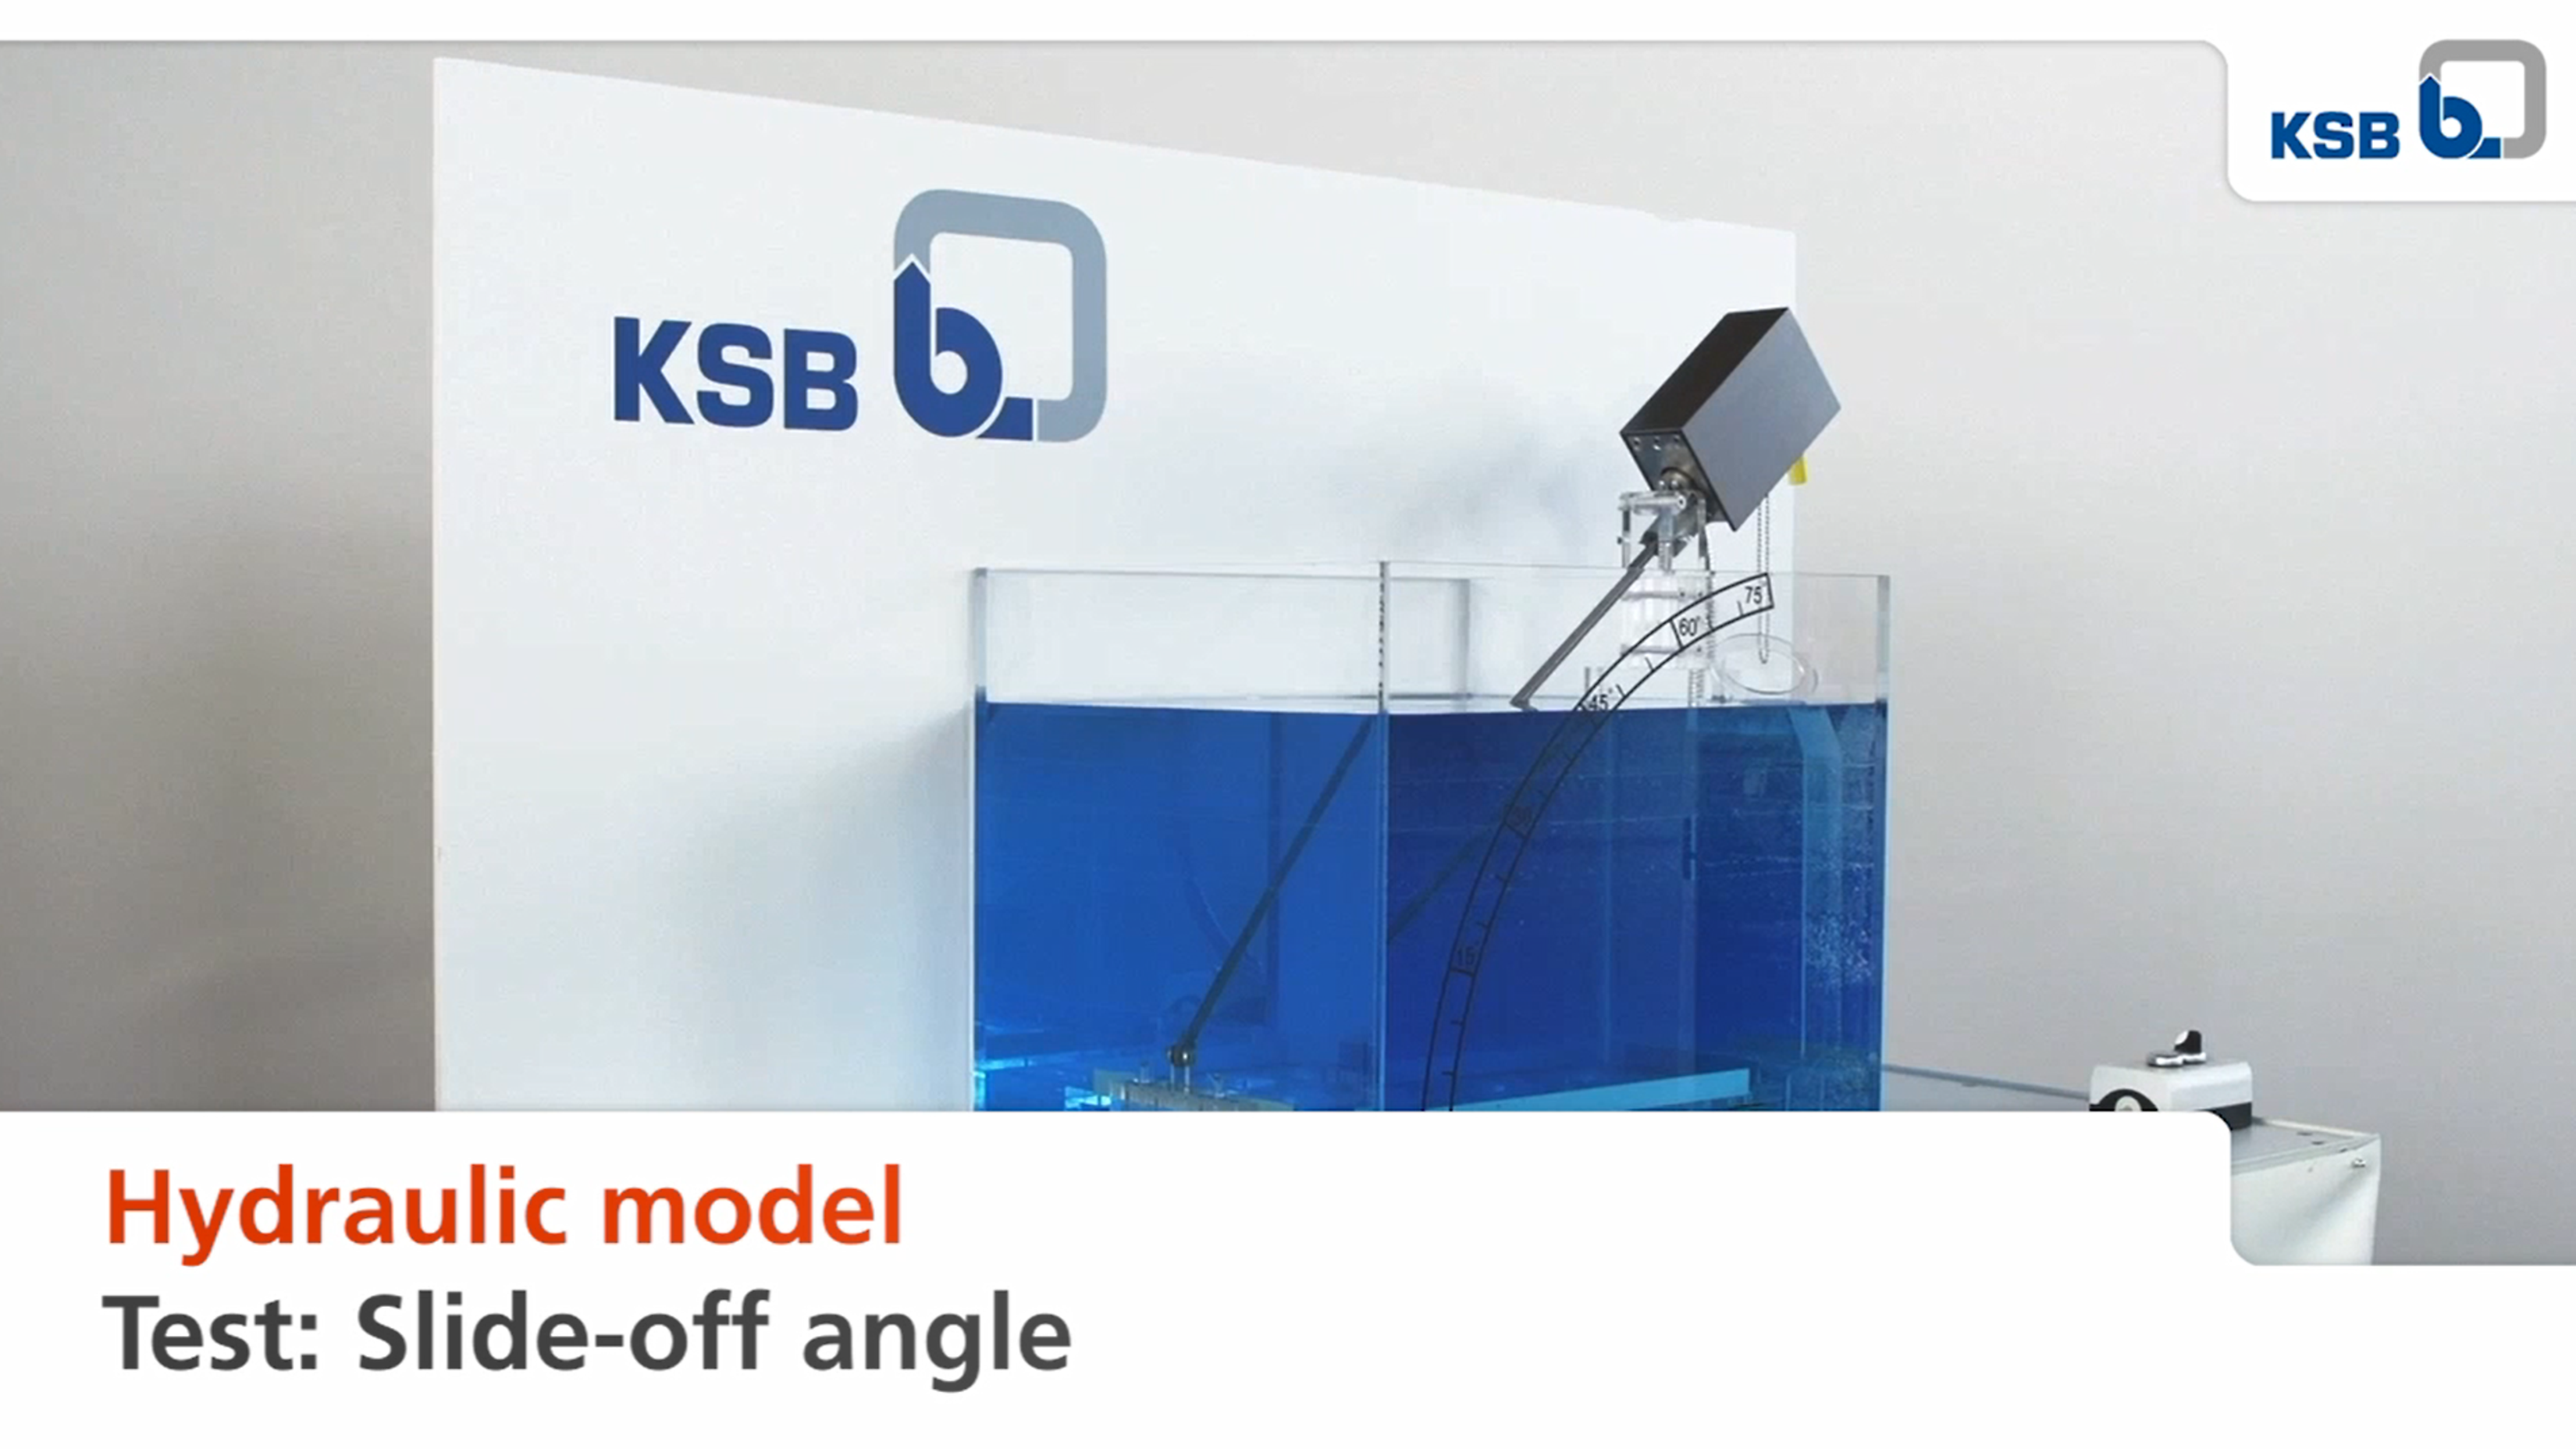 Test set-up for determining the right benching angle at KSB